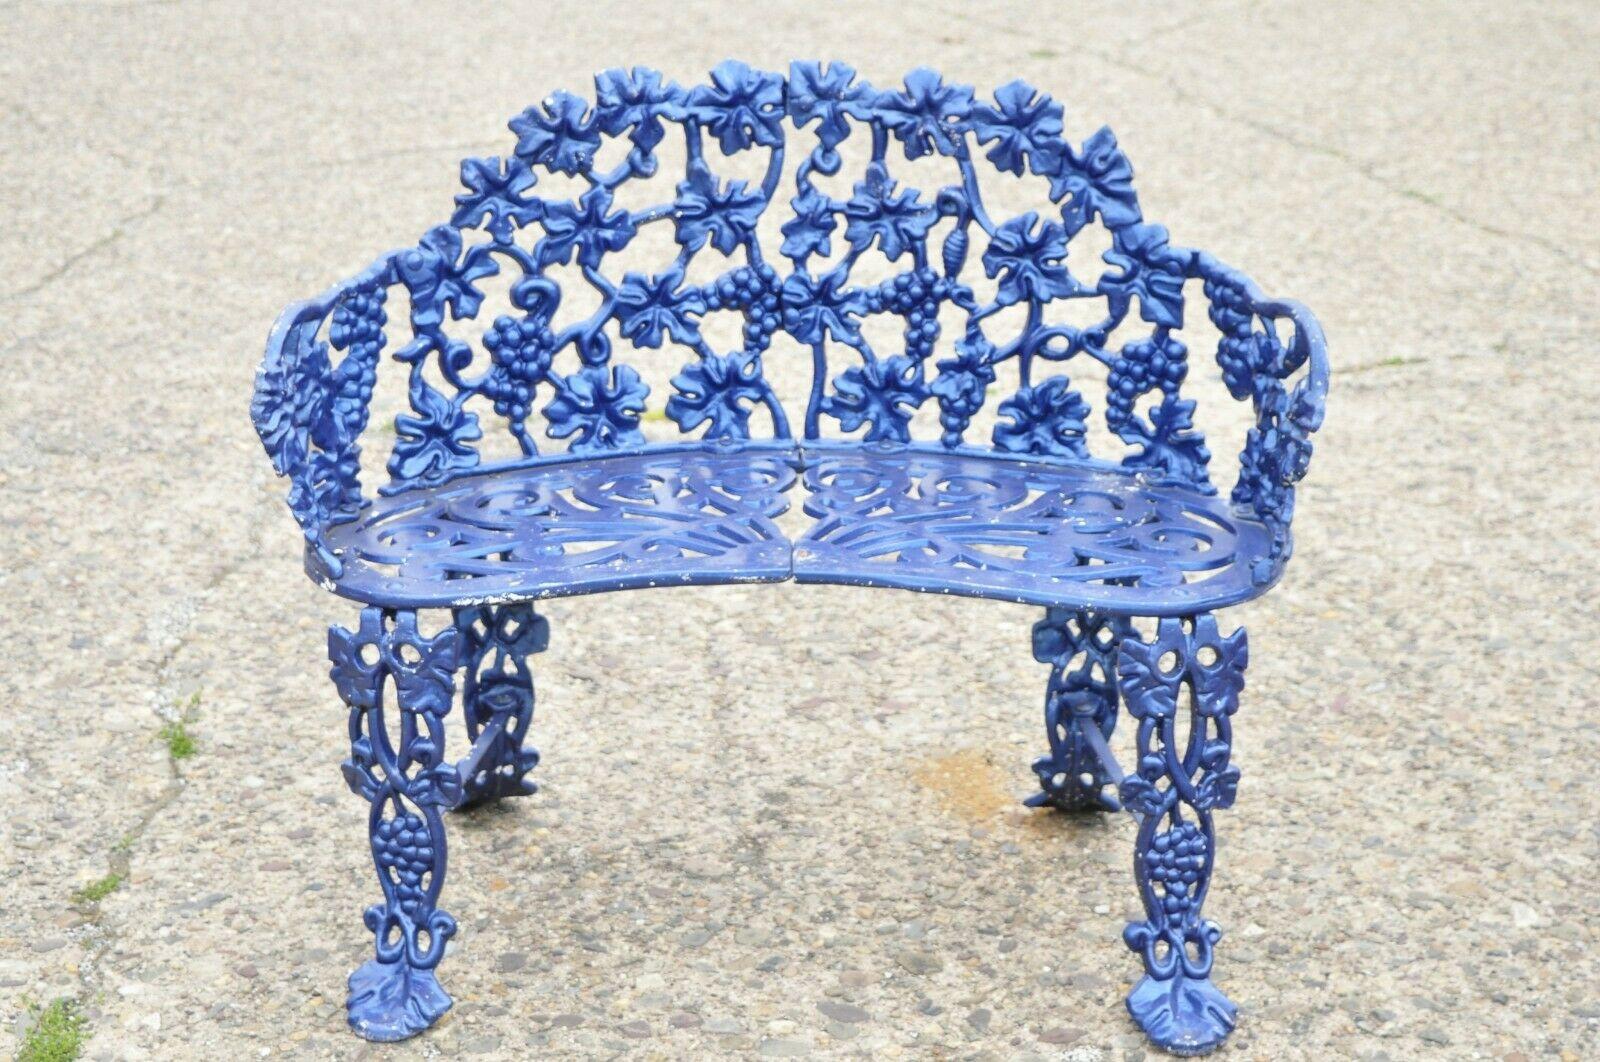 Cast aluminum blue grapevine garden set loveseat chairs table - 3 Pc set. Item features (1) small loveseat, (1) small armchair, (1) side table, blue painted finish, fancy grapevine and scrollwork pattern cast aluminum construction, very nice vintage